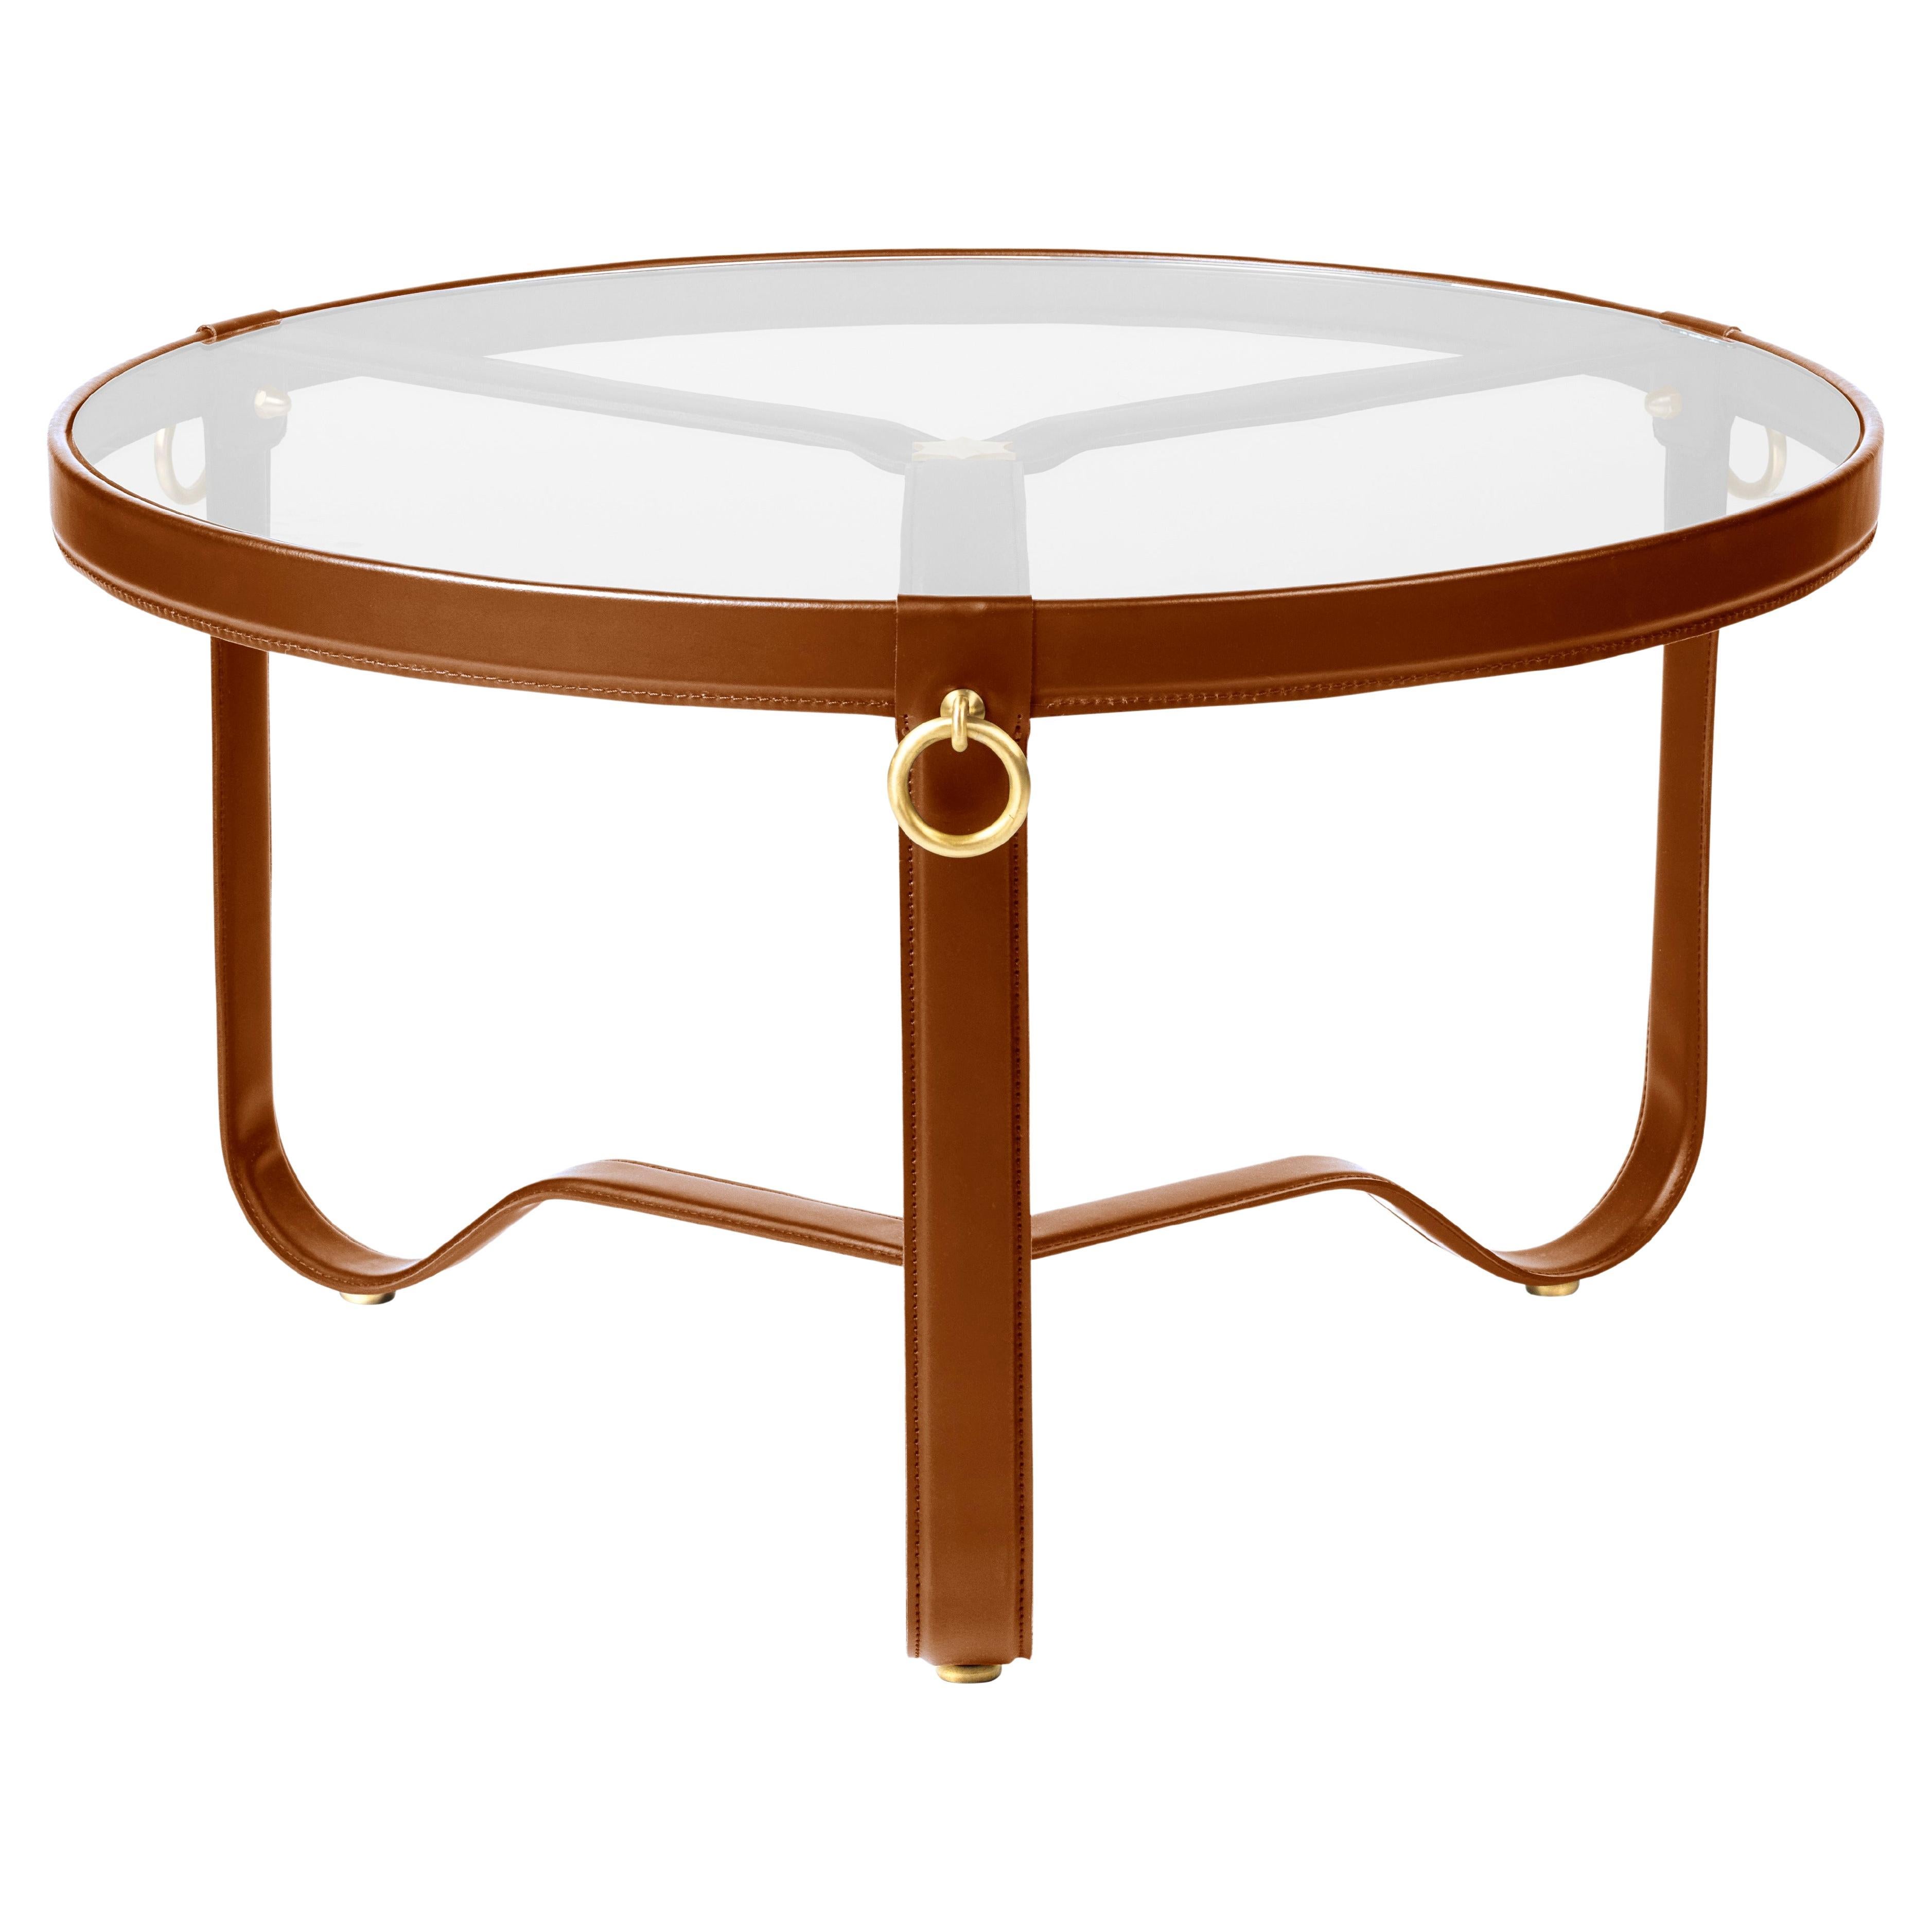 Jacques Adnet 'Circulaire' Glass and Brown Leather Coffee or Side Table for GUBI For Sale